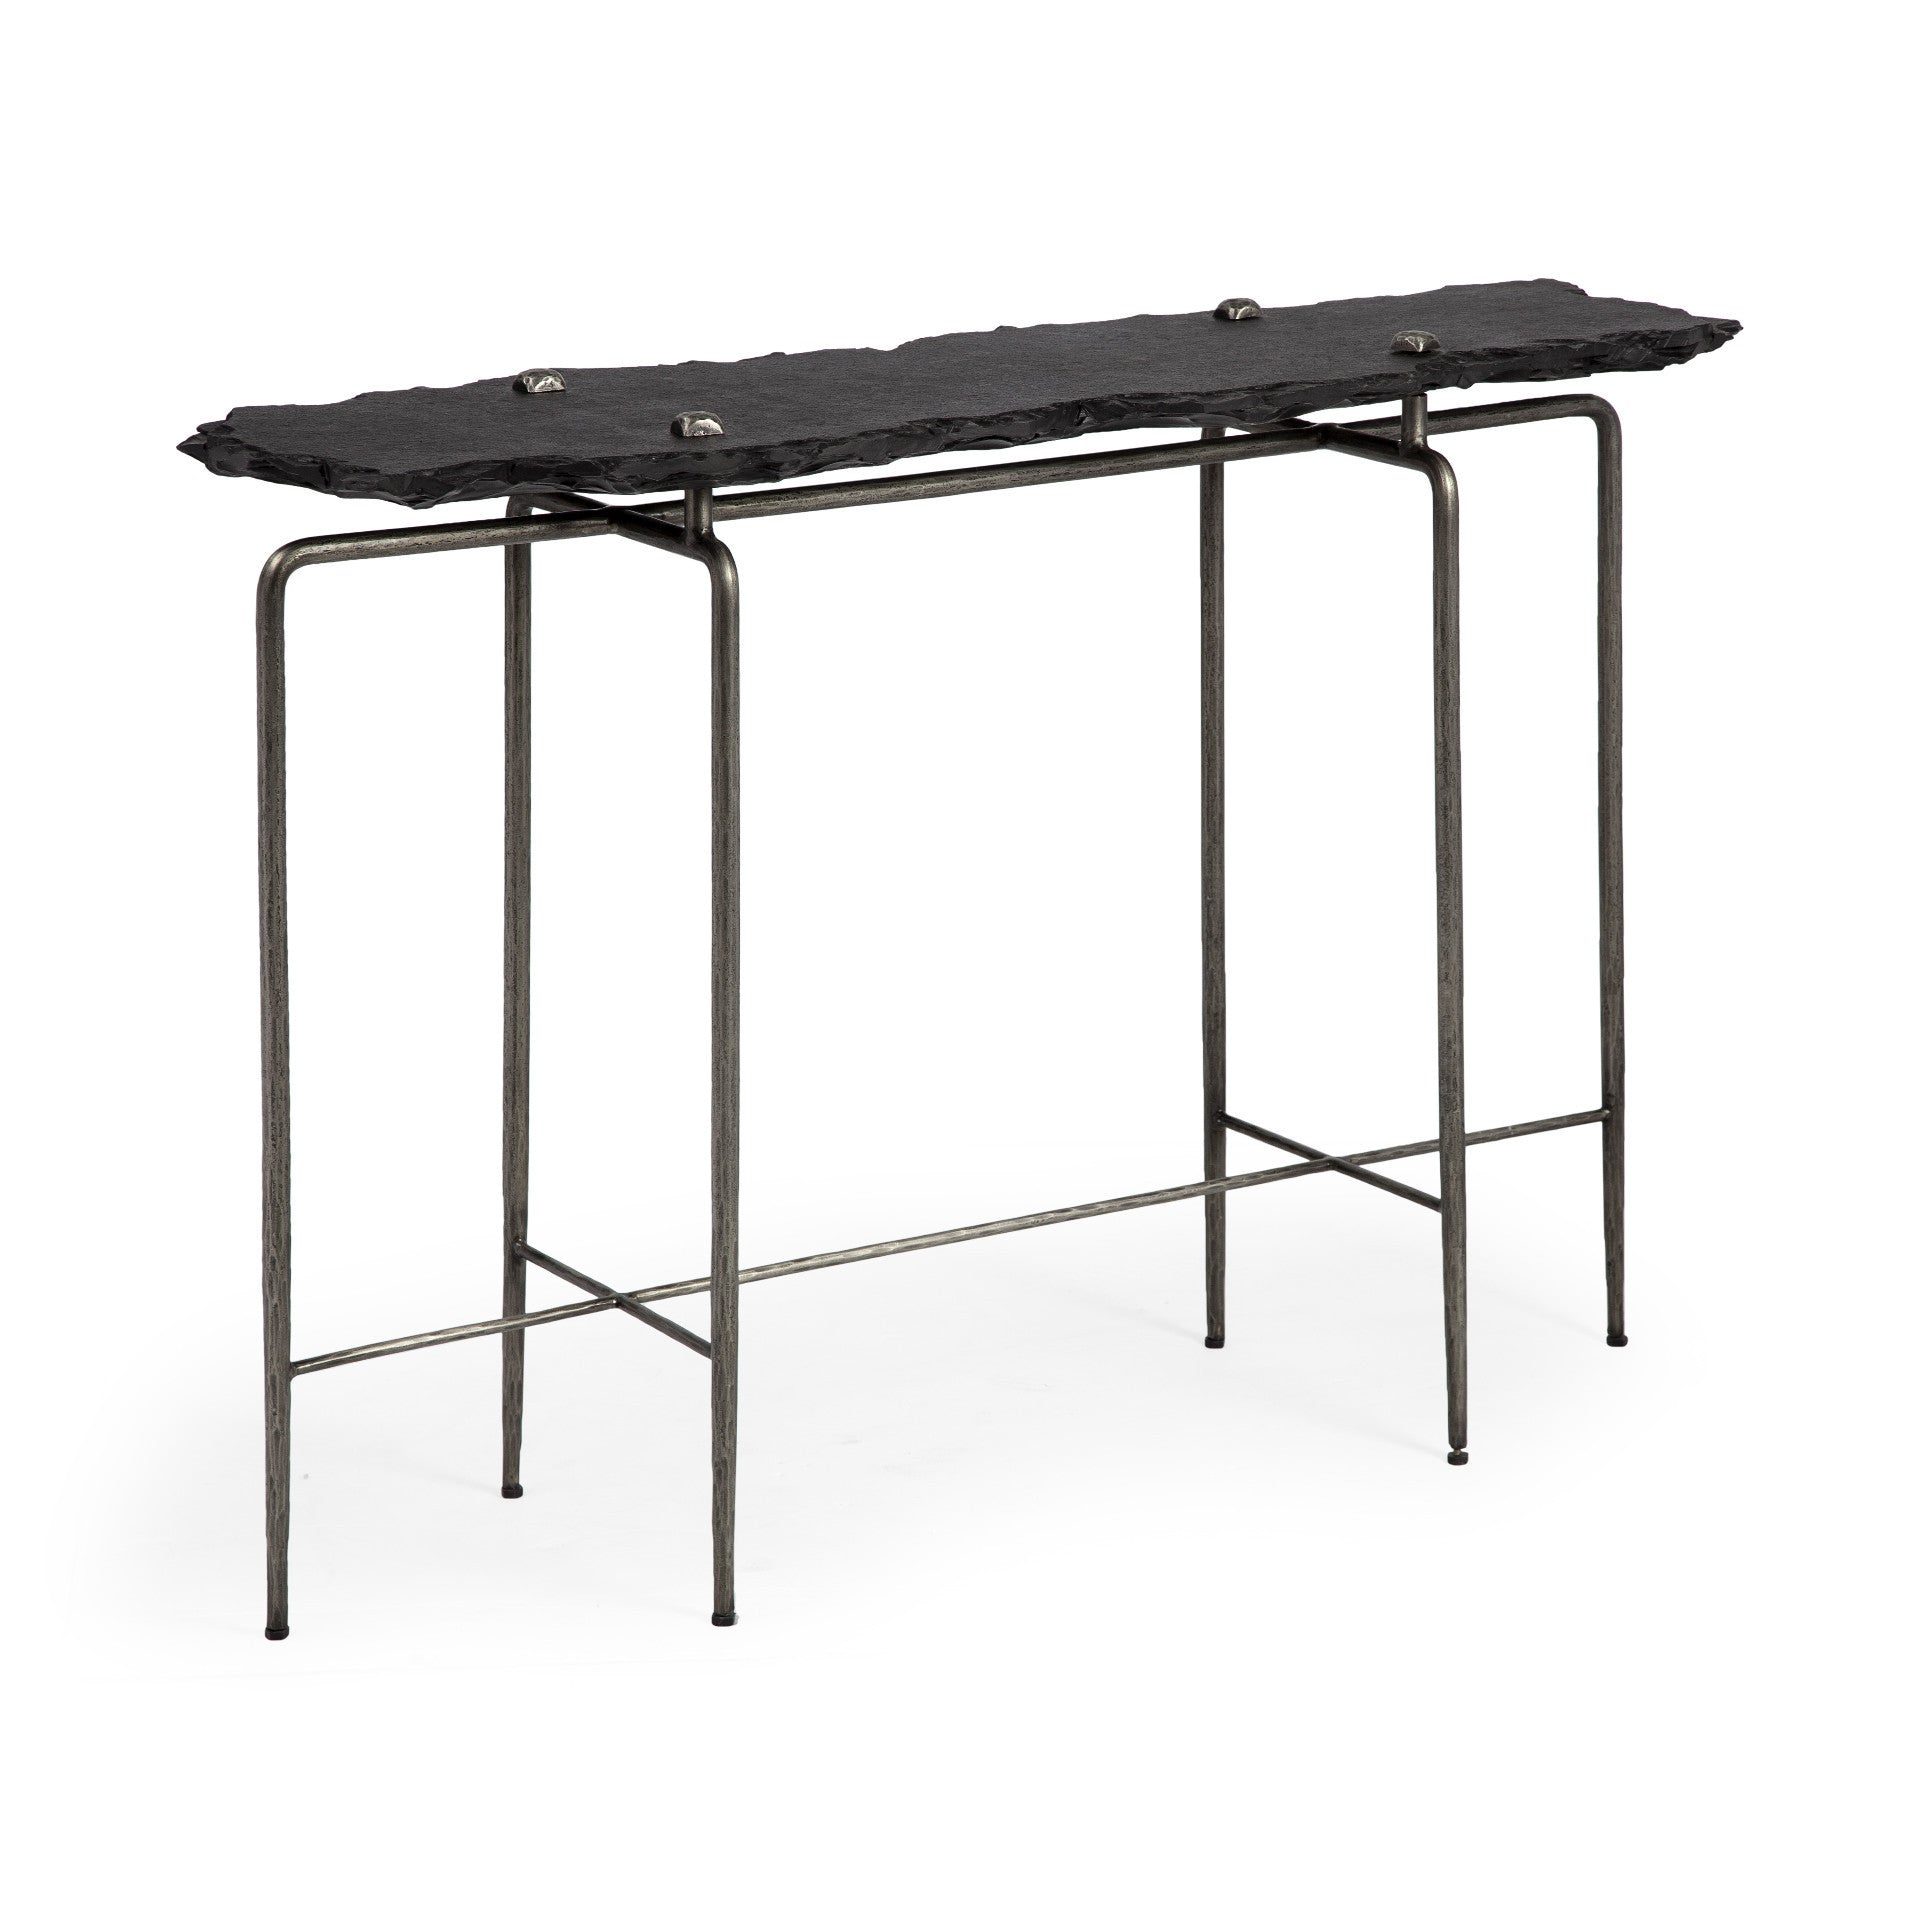 17" Black and Brown Slate 4 Legs Console Table